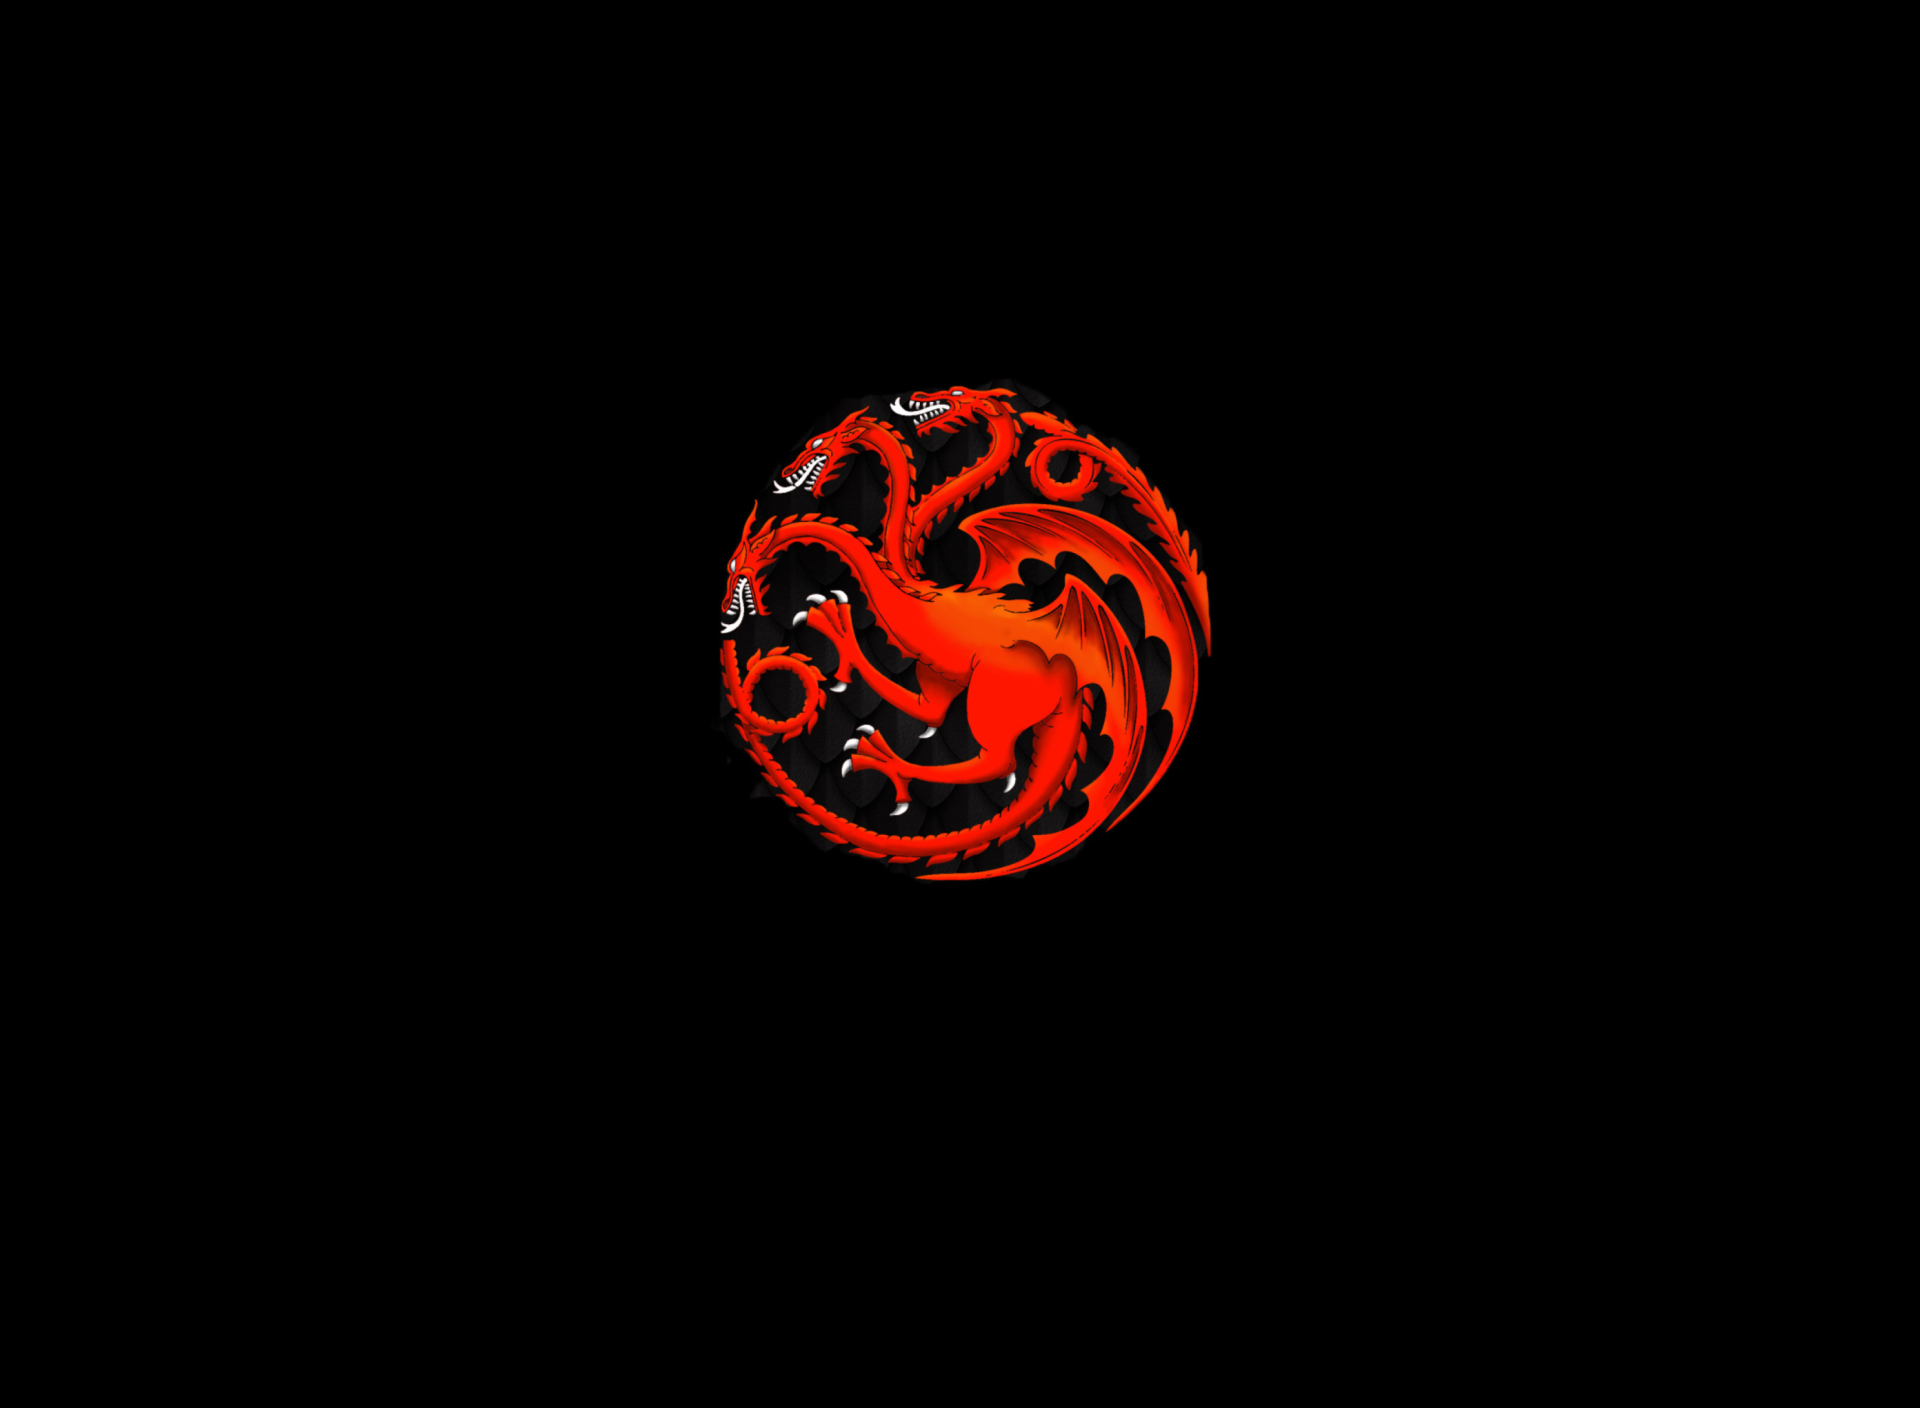 Fire And Blood Dragon wallpaper 1920x1408